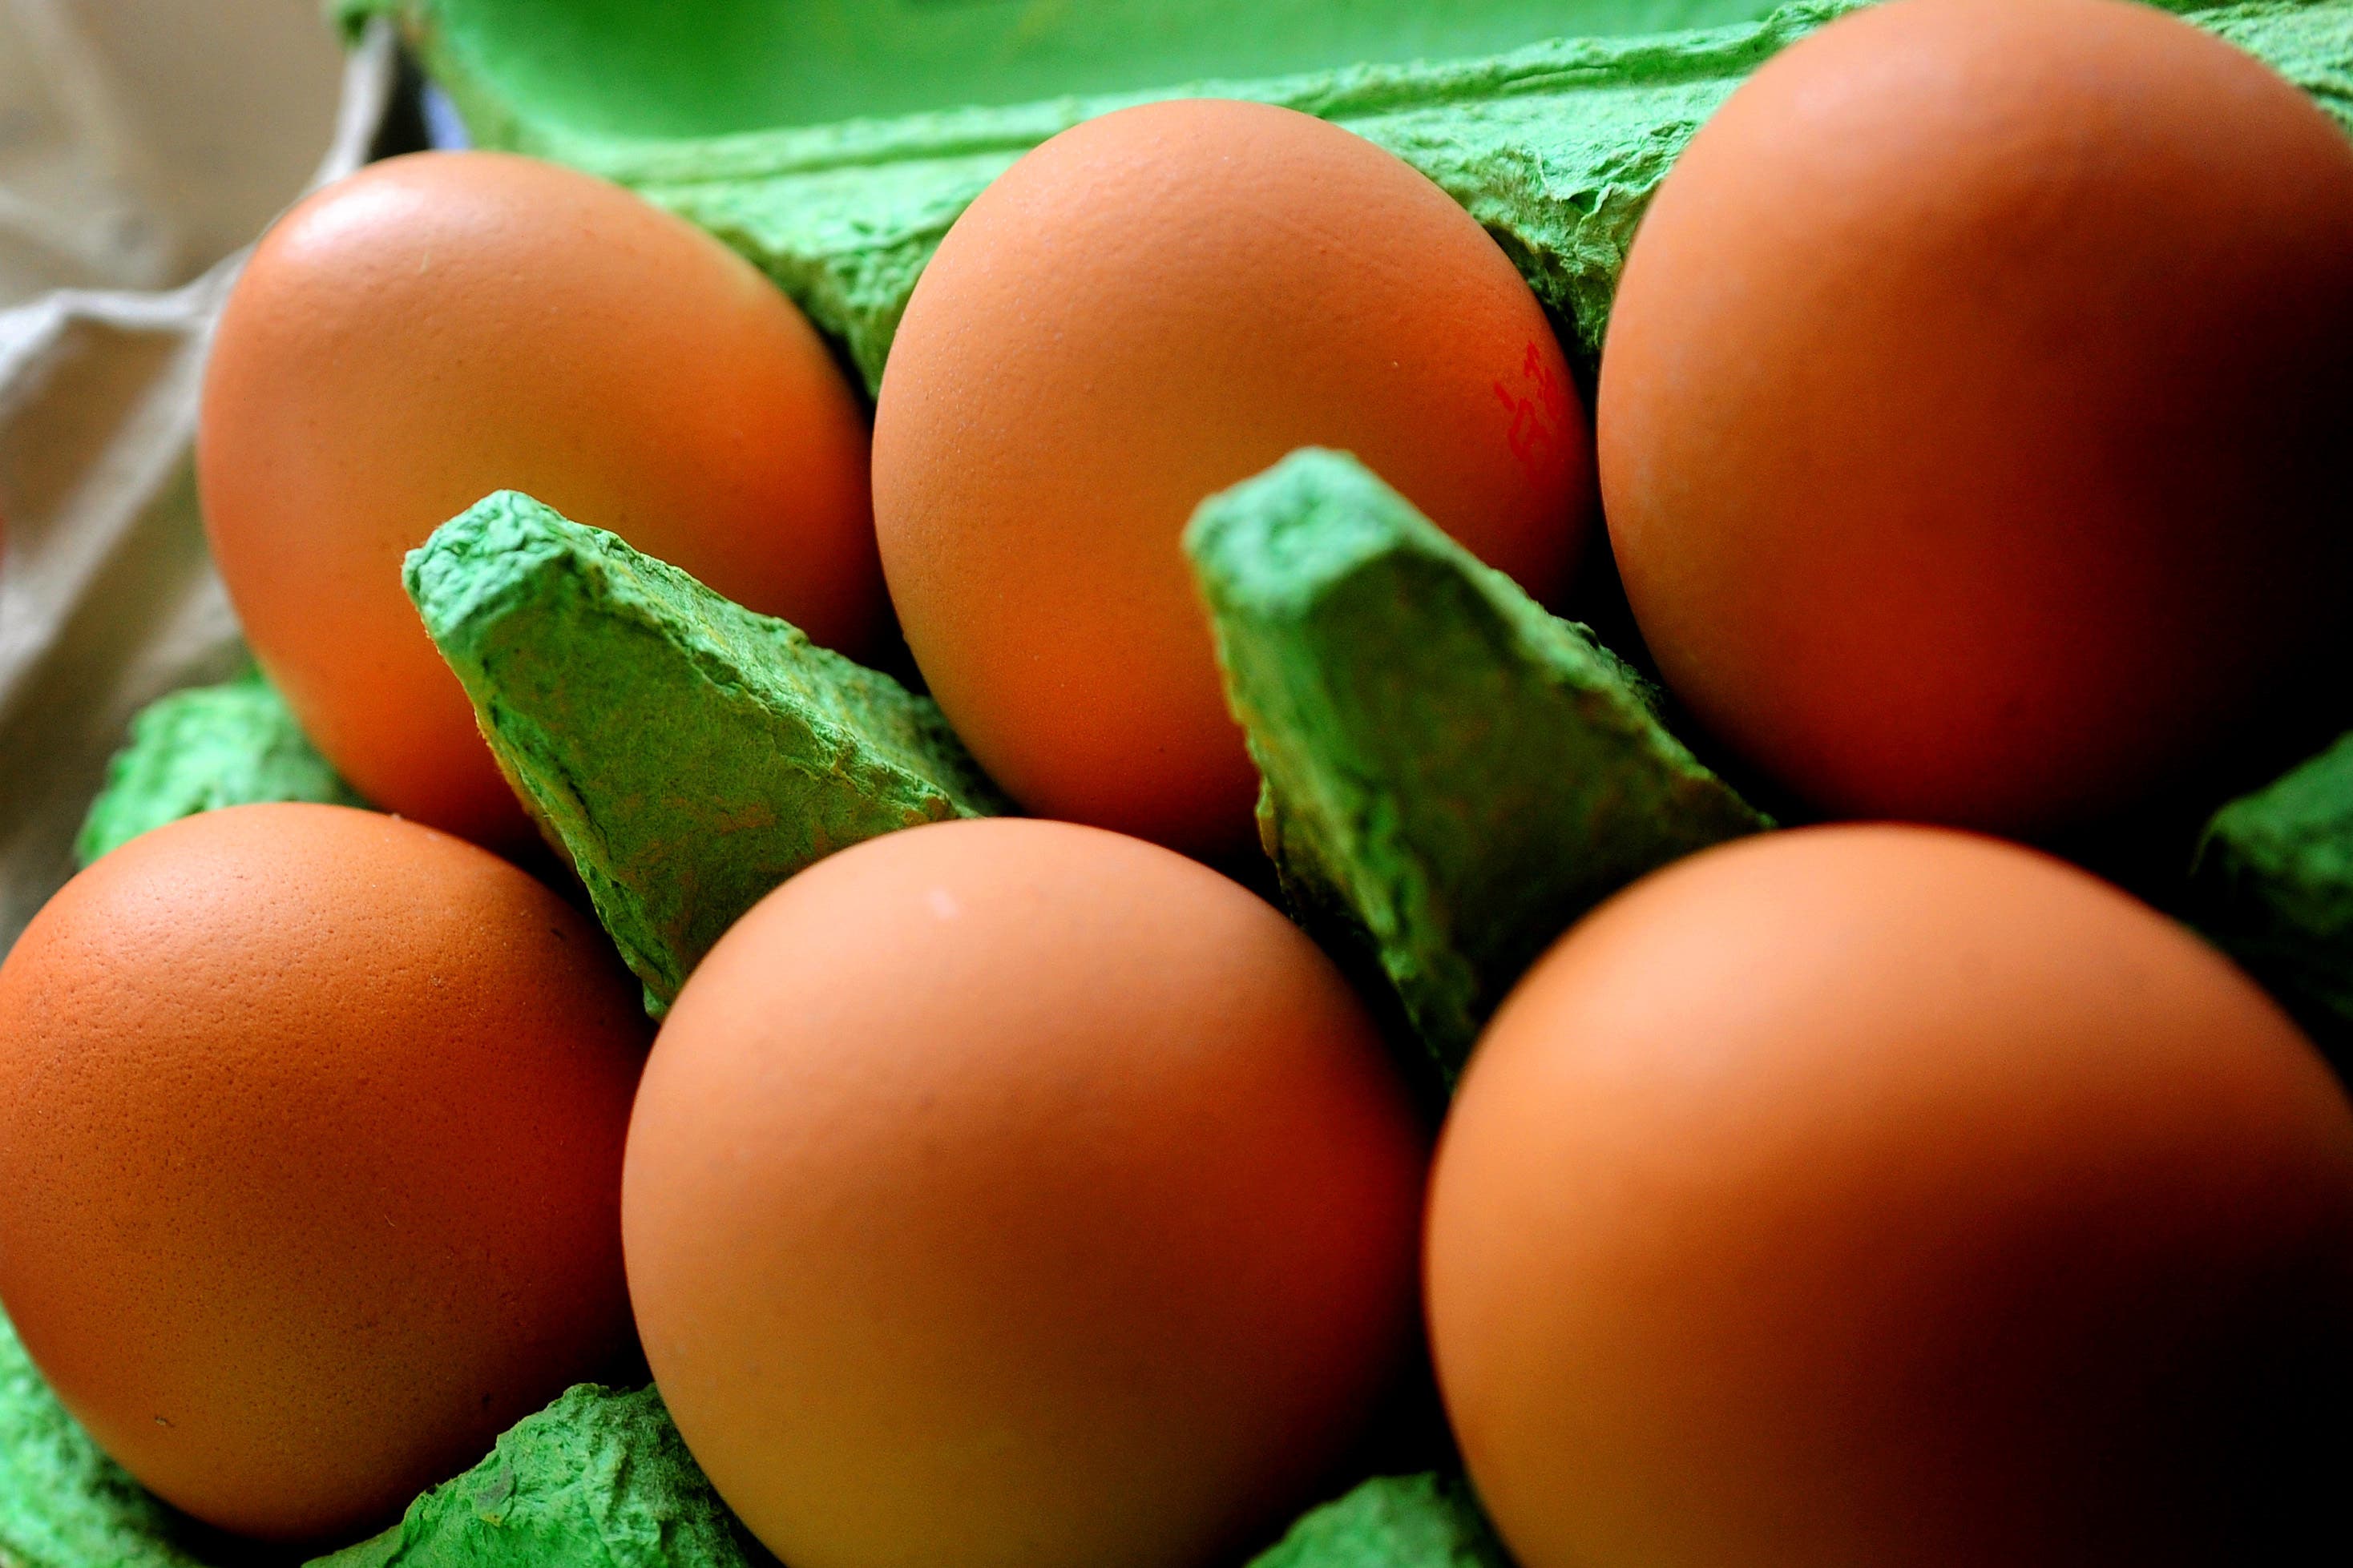 Tesco is the latest supermarket chain to ration sales of eggs